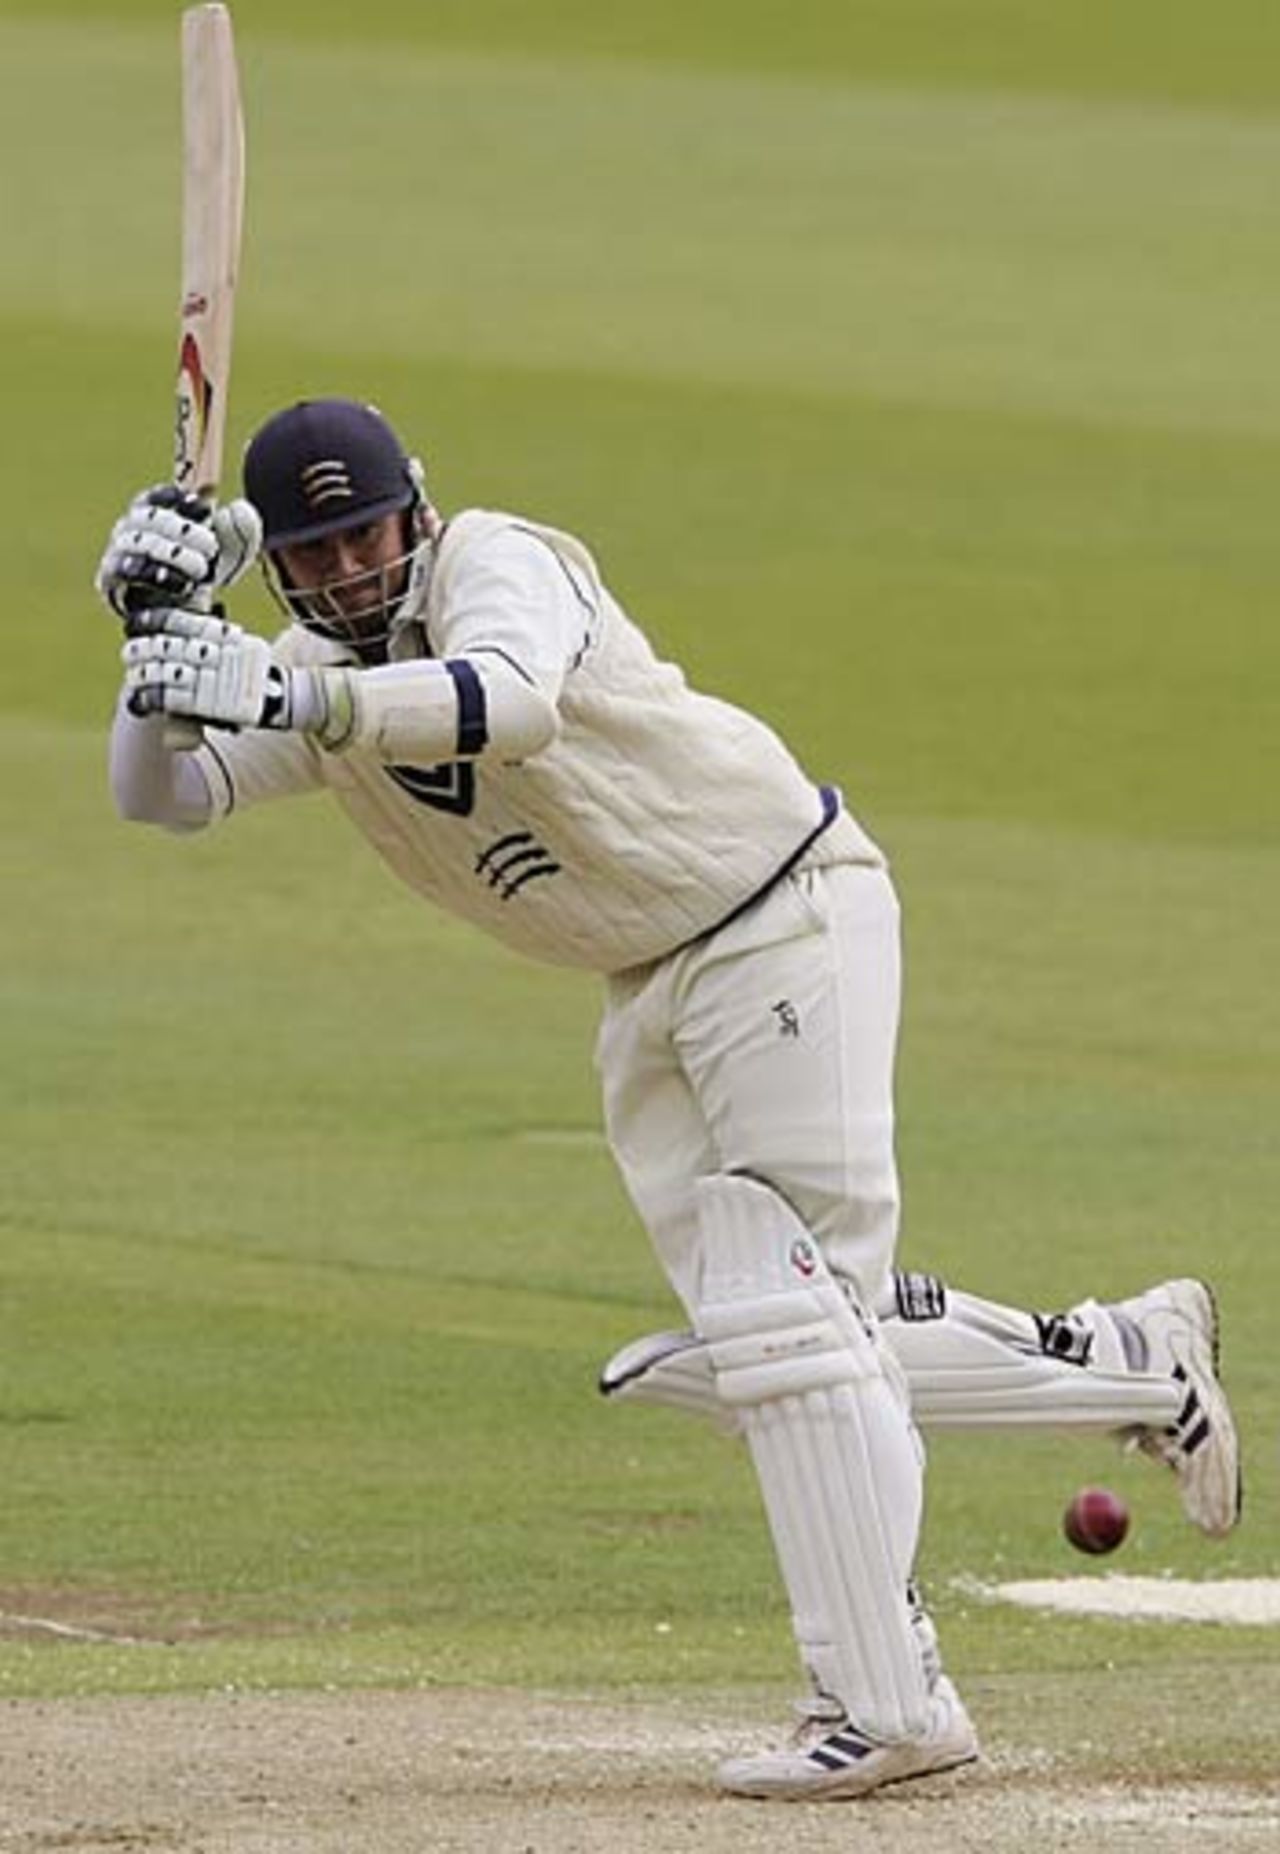 Owais Shah on his way to 73, Middlesex v Warwickshire, County Championship, Lord's, May 24, 2006